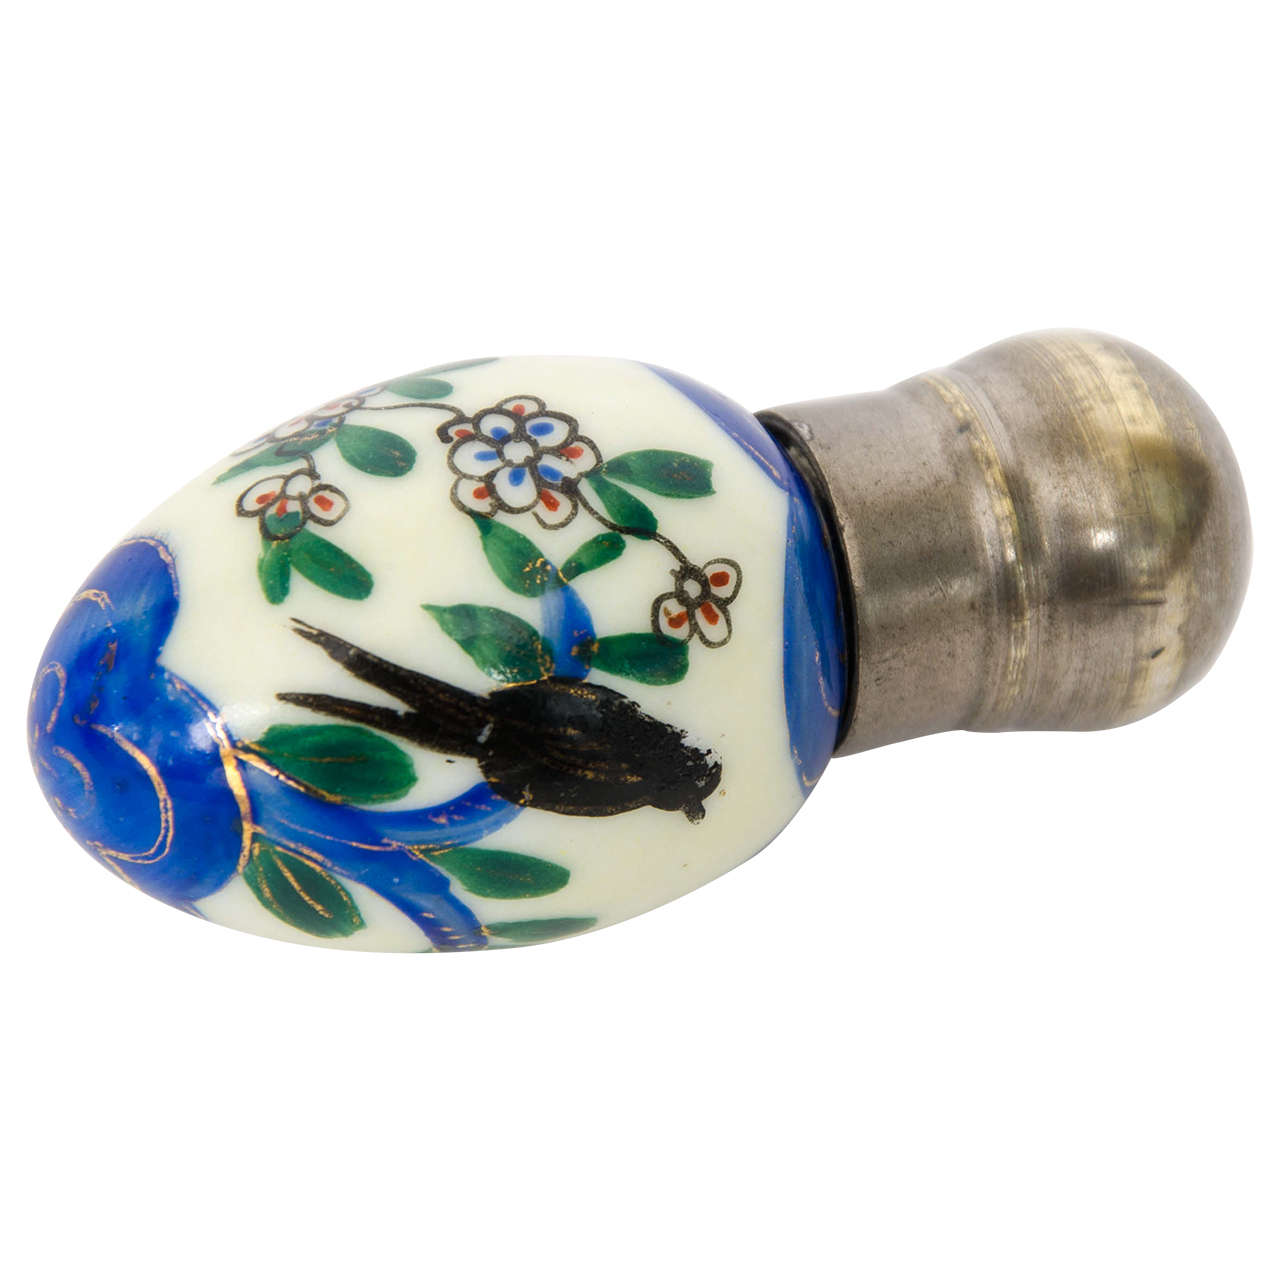 James Macintyre, Egg shaped, PERFUME or SCENT BOTTLE, Hand painted, circa 1875